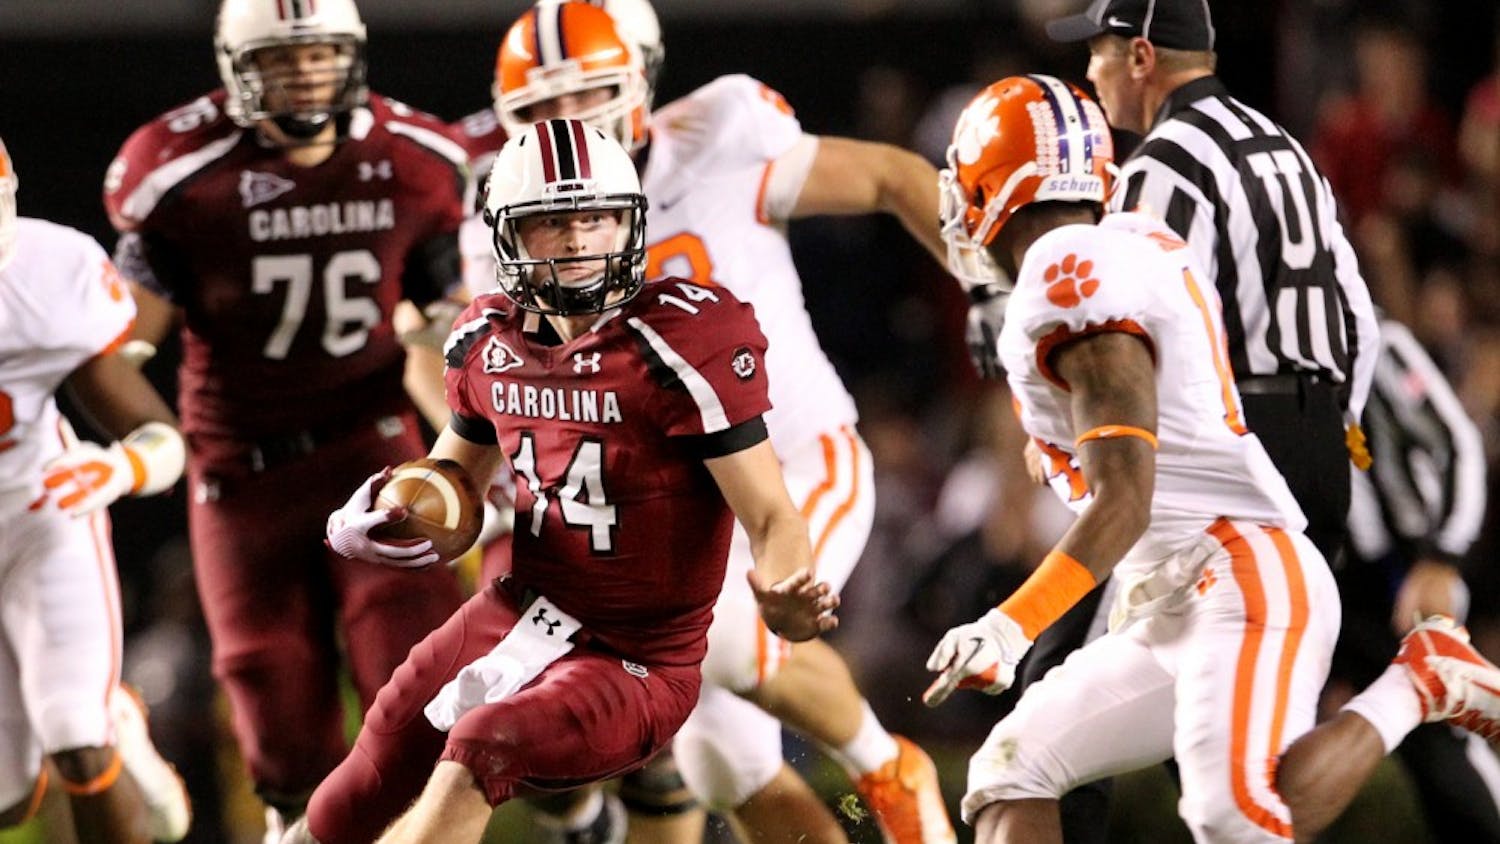 Quarterback Connor Shaw of South Carolina scrambles for a gain against Clemson on Saturday, November 26, 2011, in Columbia, South Carolina. (C. Aluka Berry/The State/MCT)